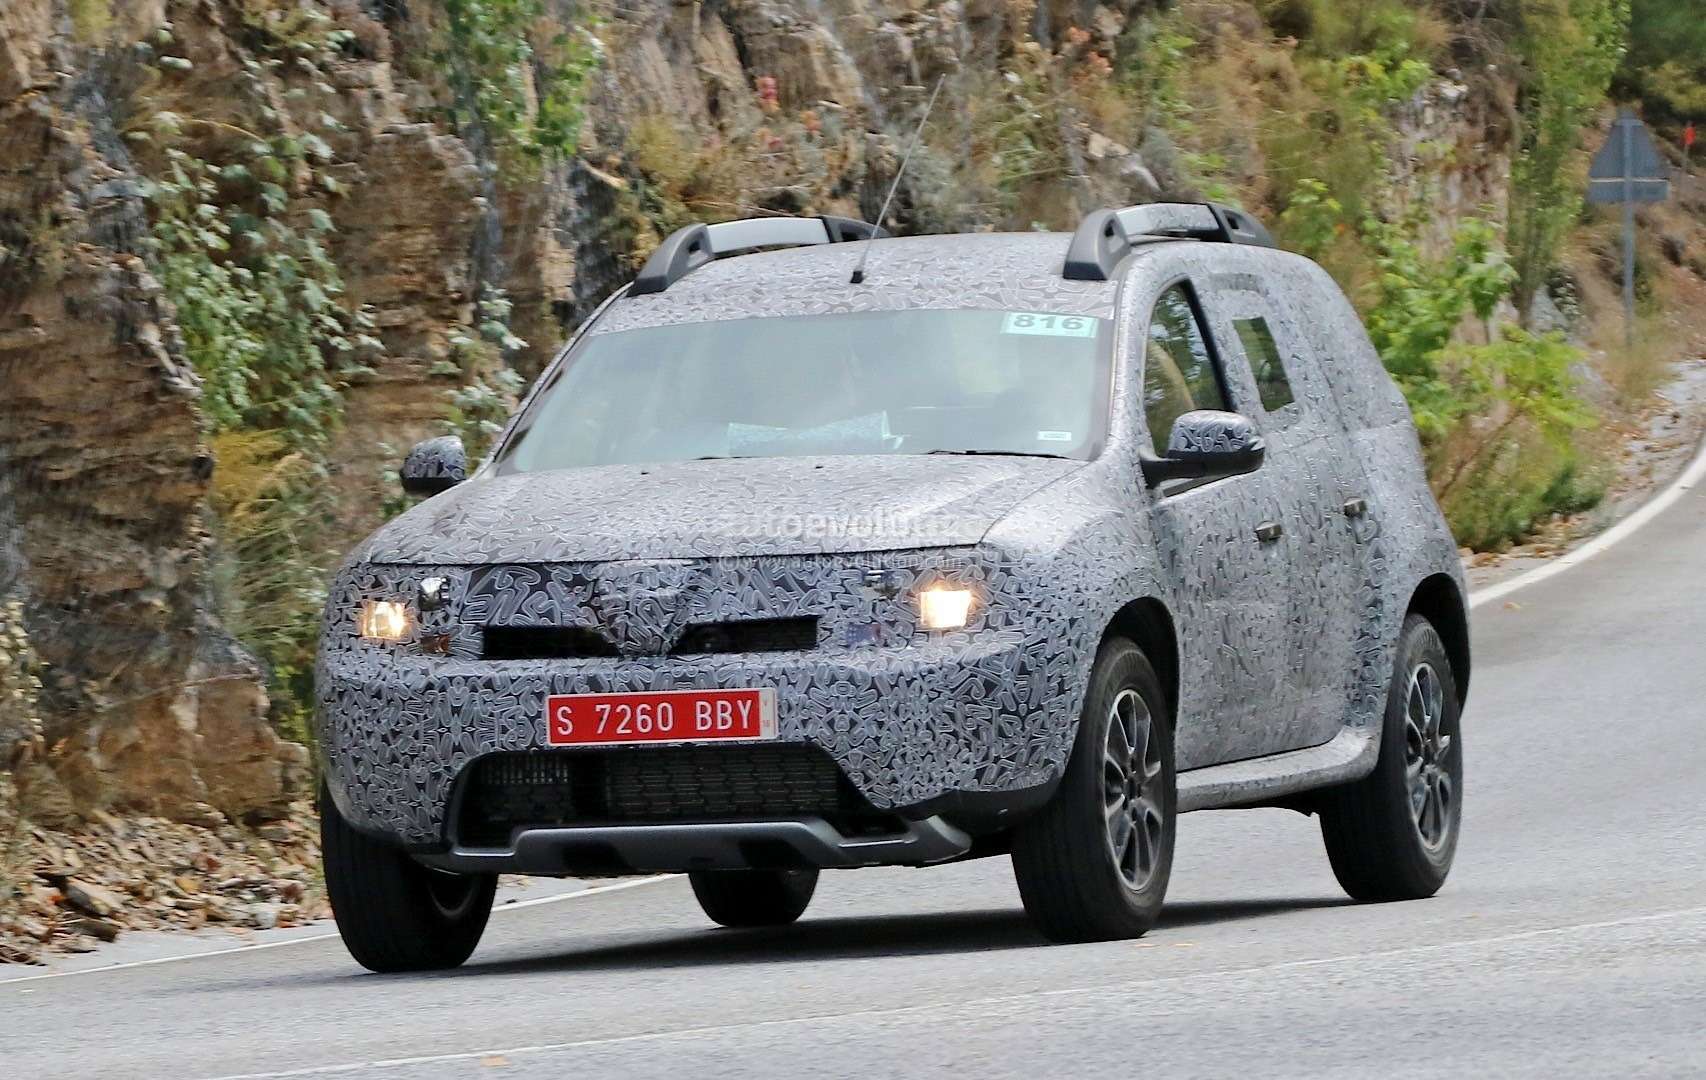 all-new-dacia-duster-caught-in-first-spyshots-plus-dacia-novelties-for-frankfurt-photo-gallery_2